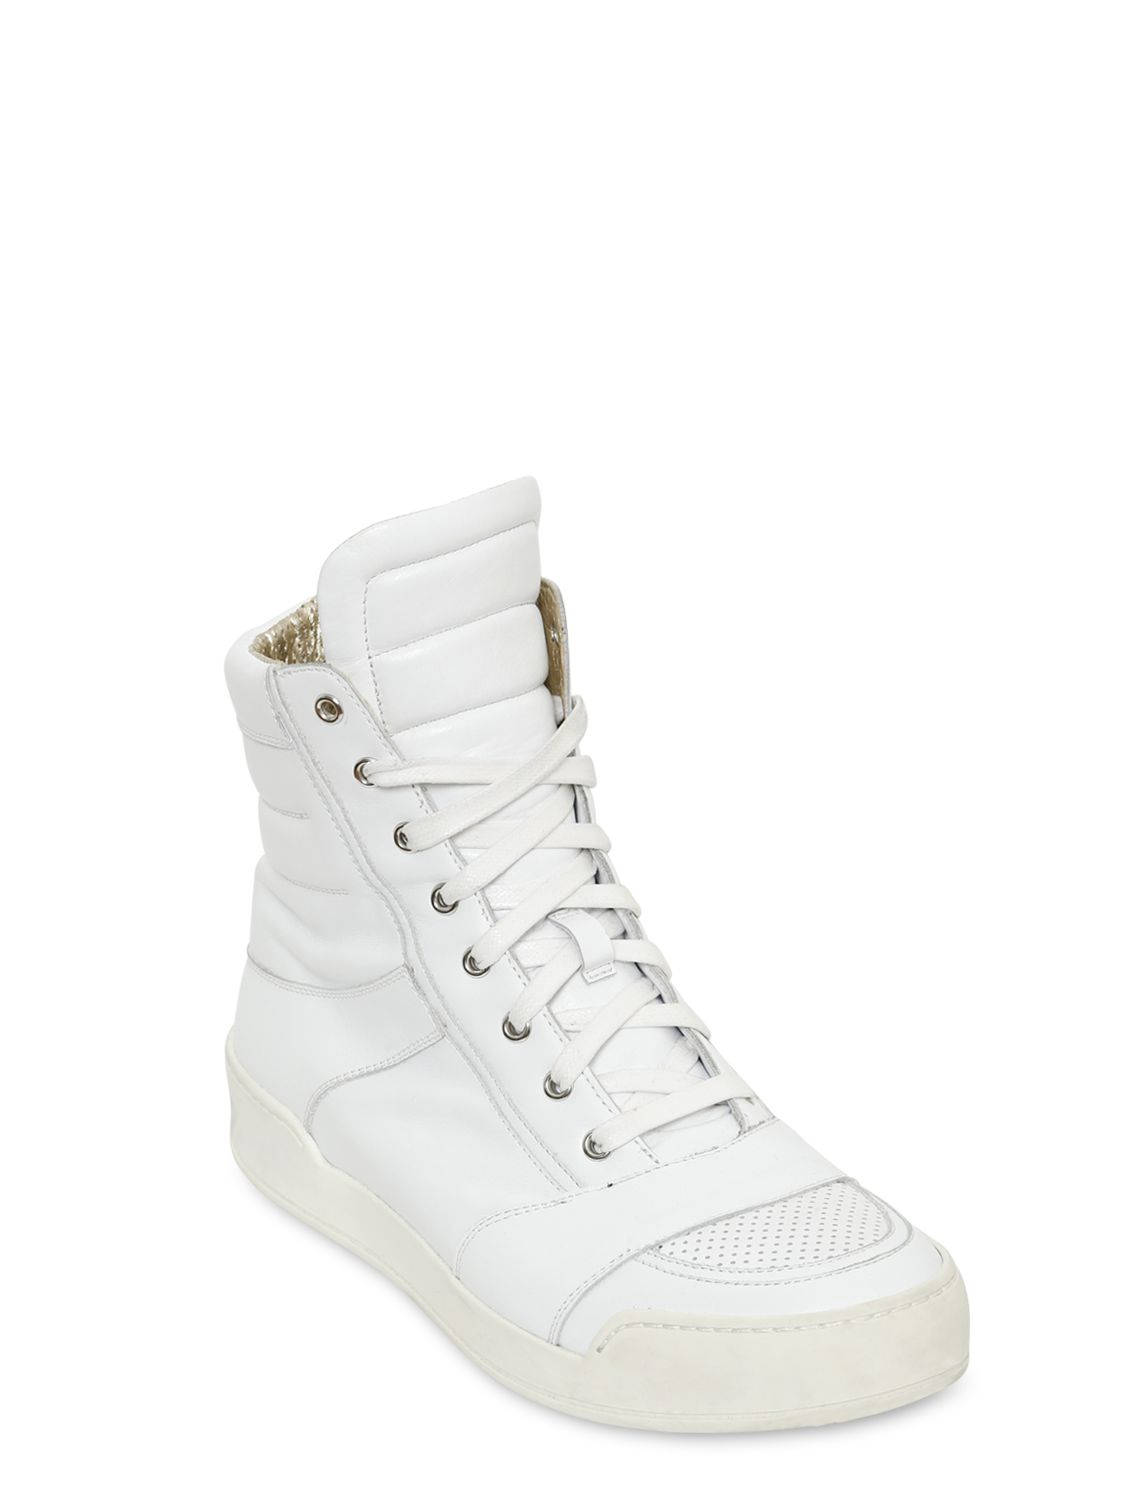 high top white leather sneakers